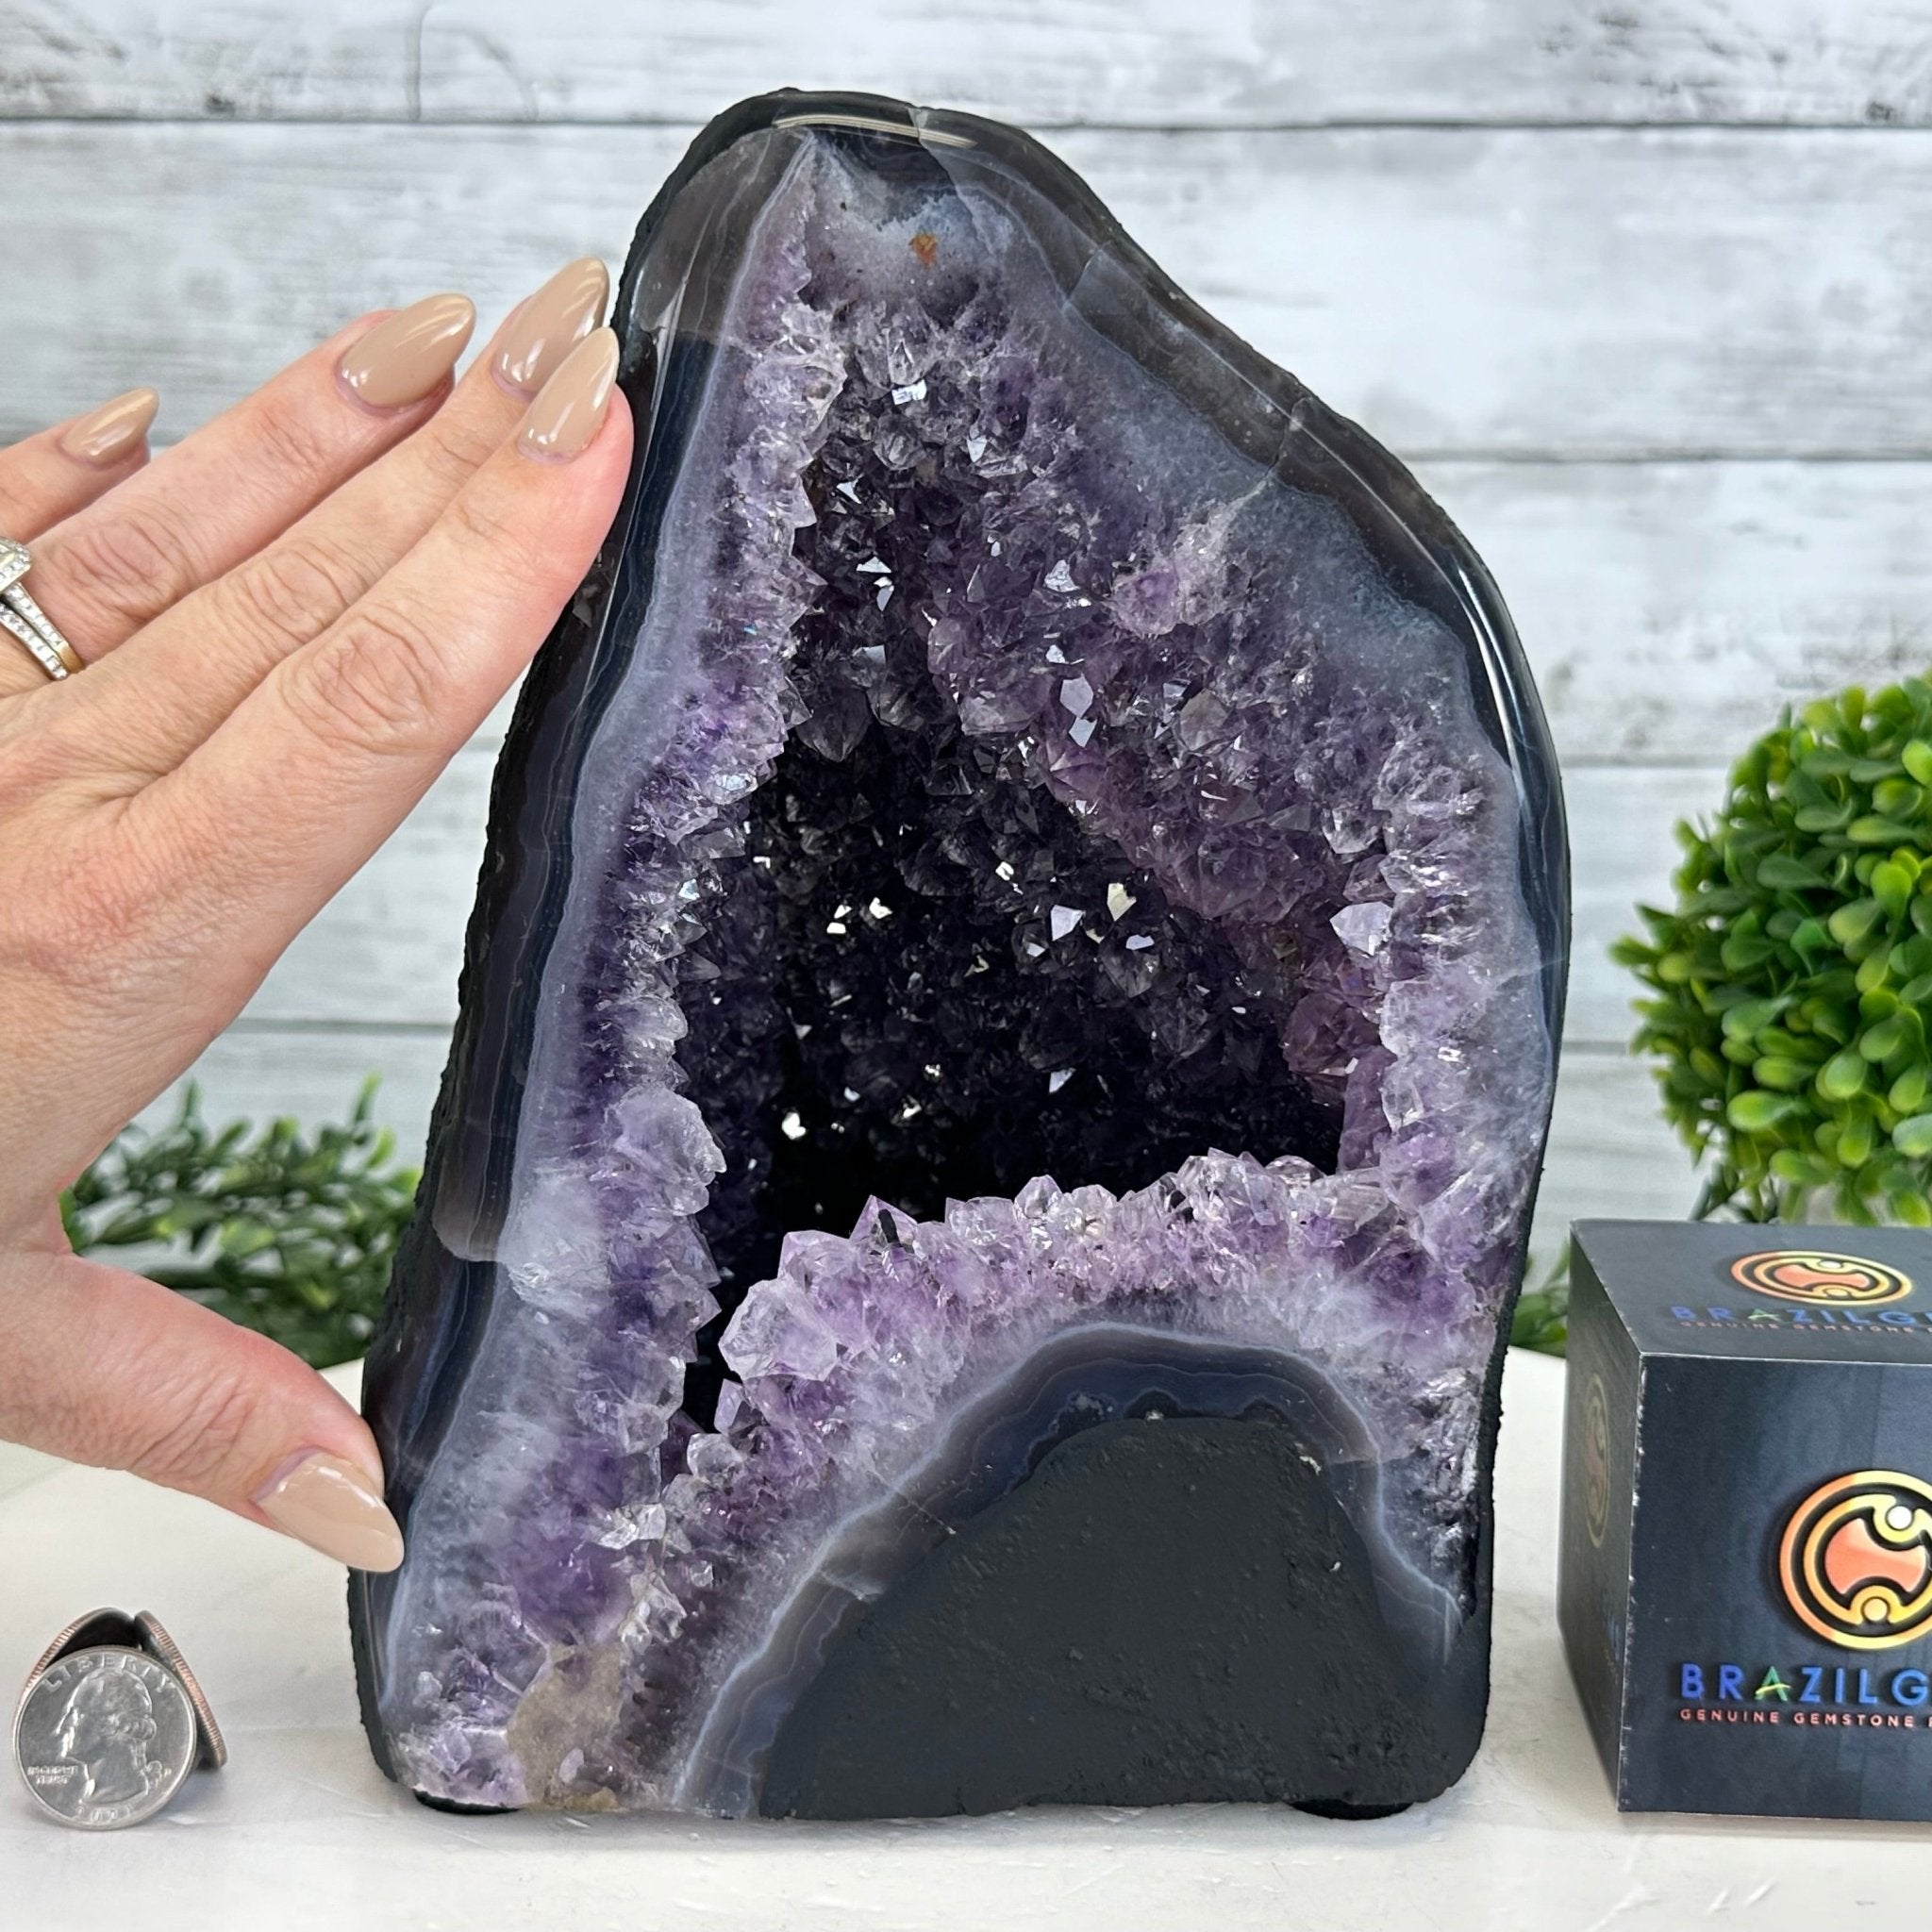 Quality Brazilian Amethyst Cathedral, 12.2 lbs & 8.8" Tall, #5601 - 1358 - Brazil GemsBrazil GemsQuality Brazilian Amethyst Cathedral, 12.2 lbs & 8.8" Tall, #5601 - 1358Cathedrals5601 - 1358